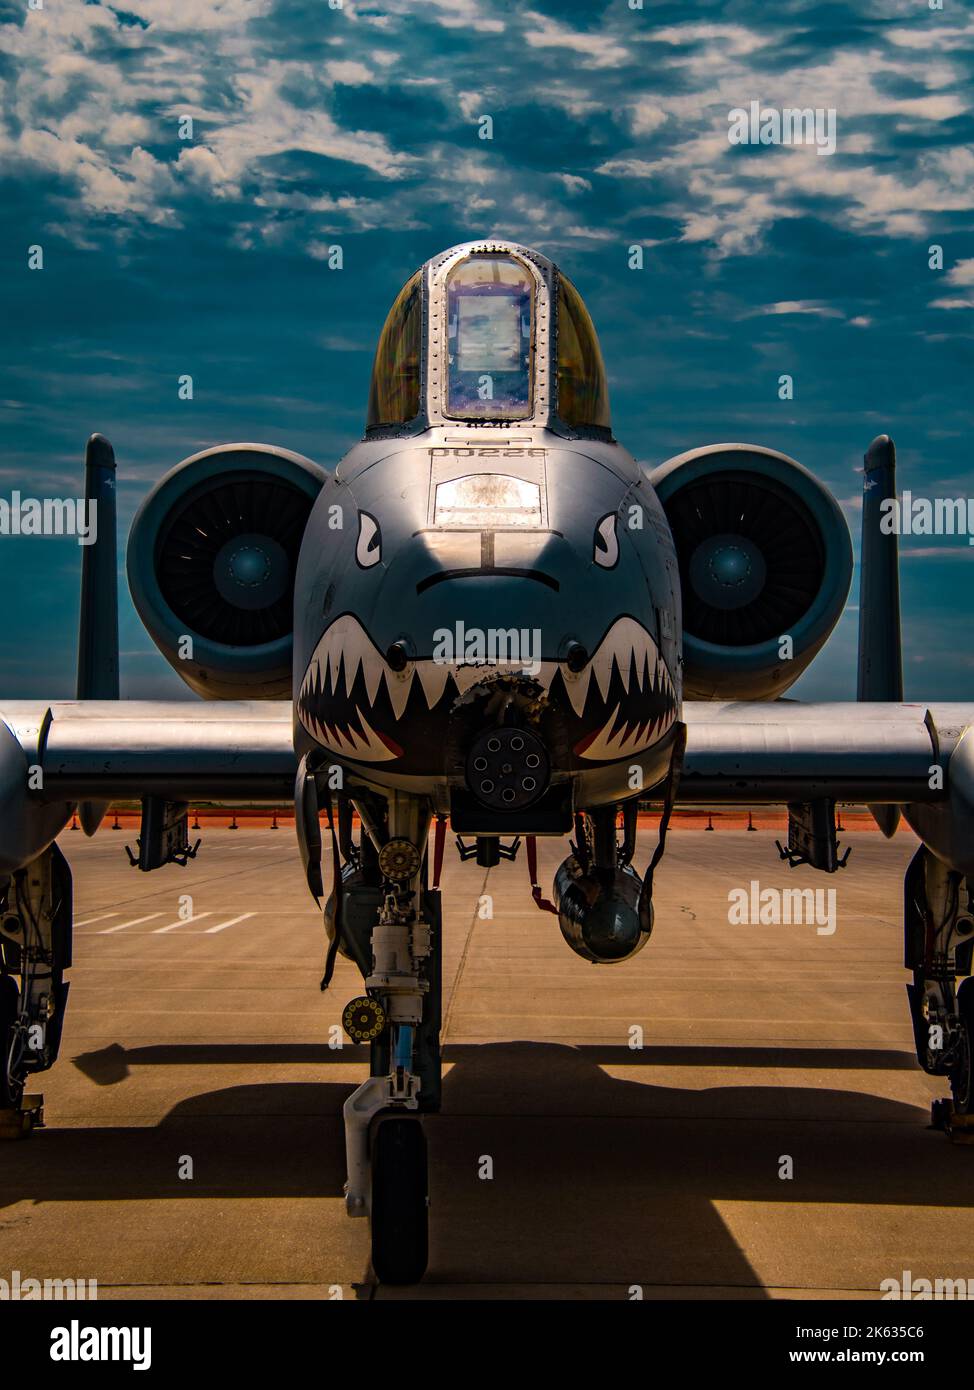 The vertical view of a shark-faced Fairchild Republic A-10 Thunderbolt II parked under the cloudy sky Stock Photo